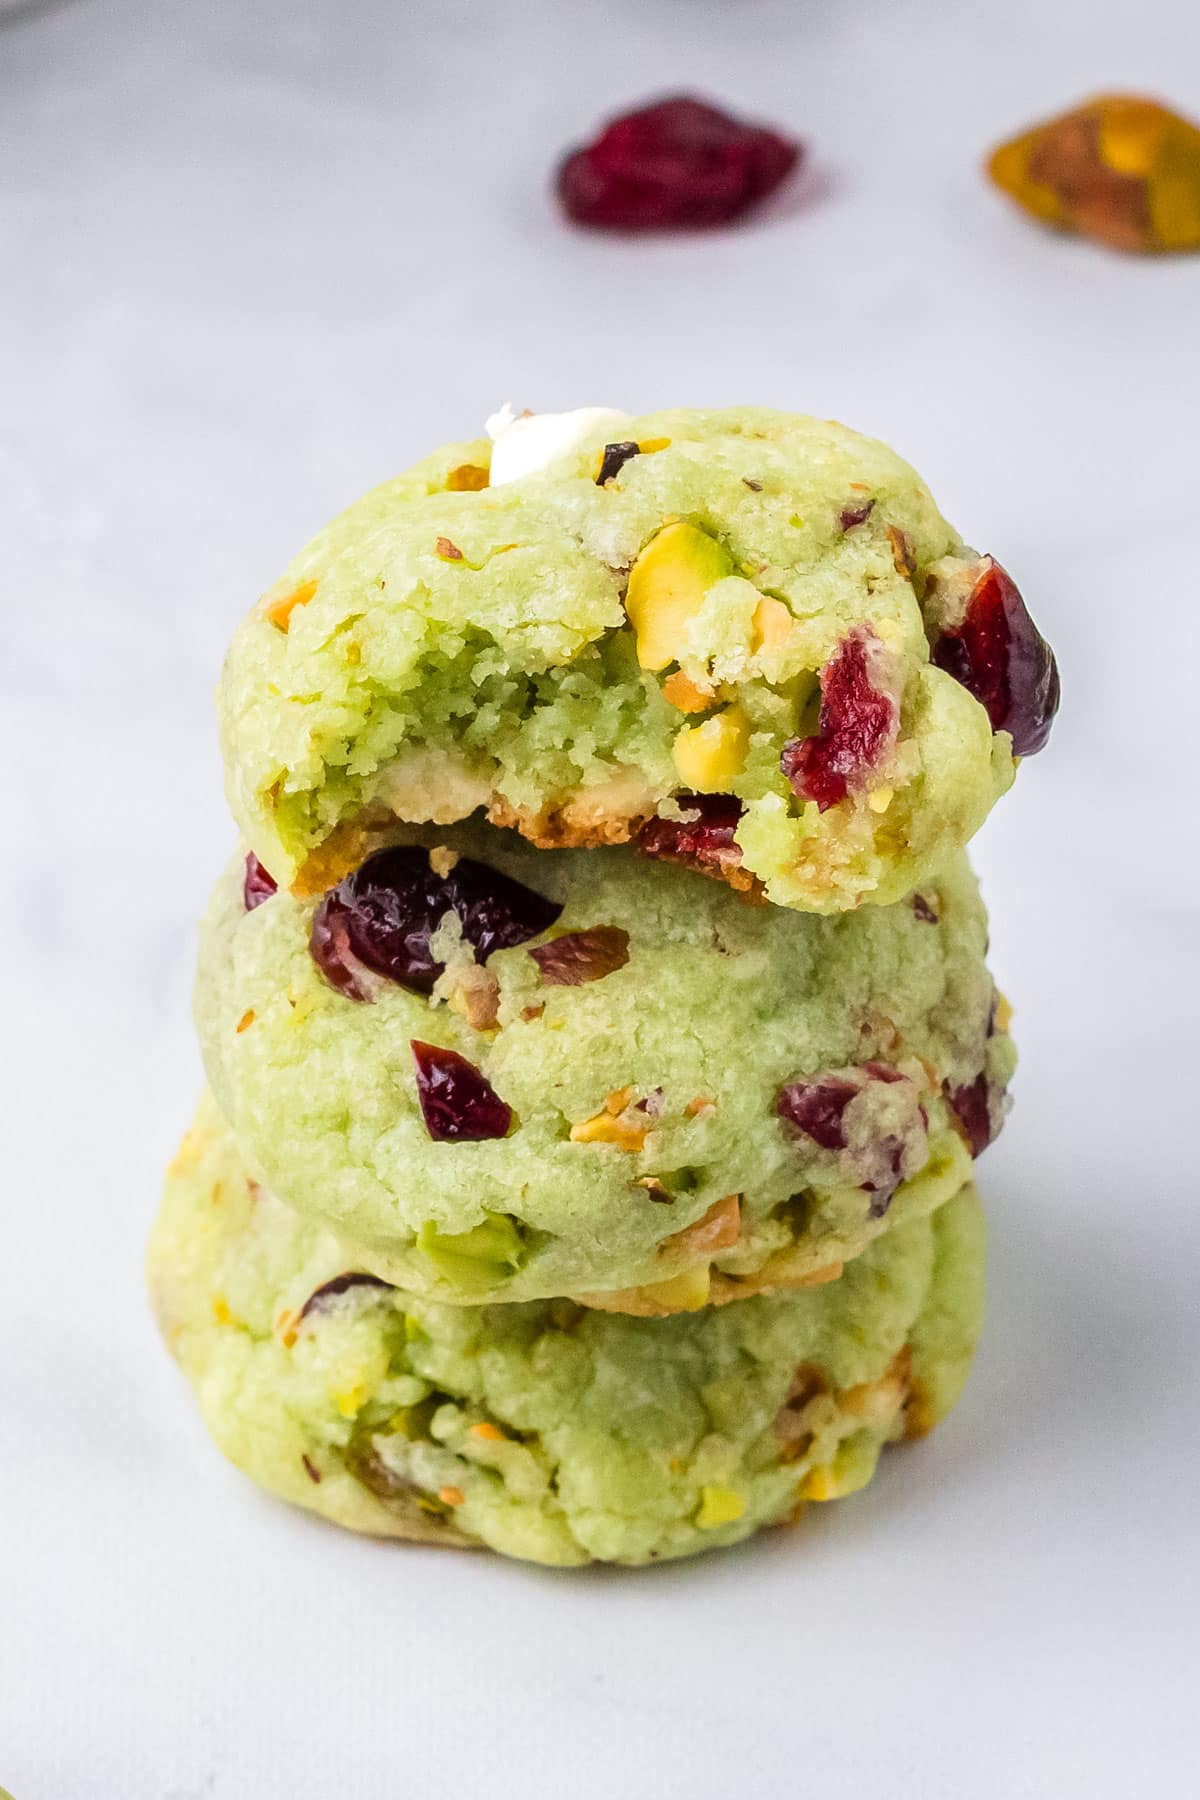 Three Pistachio Cranberry Cookies stacked on top of each other and a bite taken out of the top one so you can see what the interior looks like.